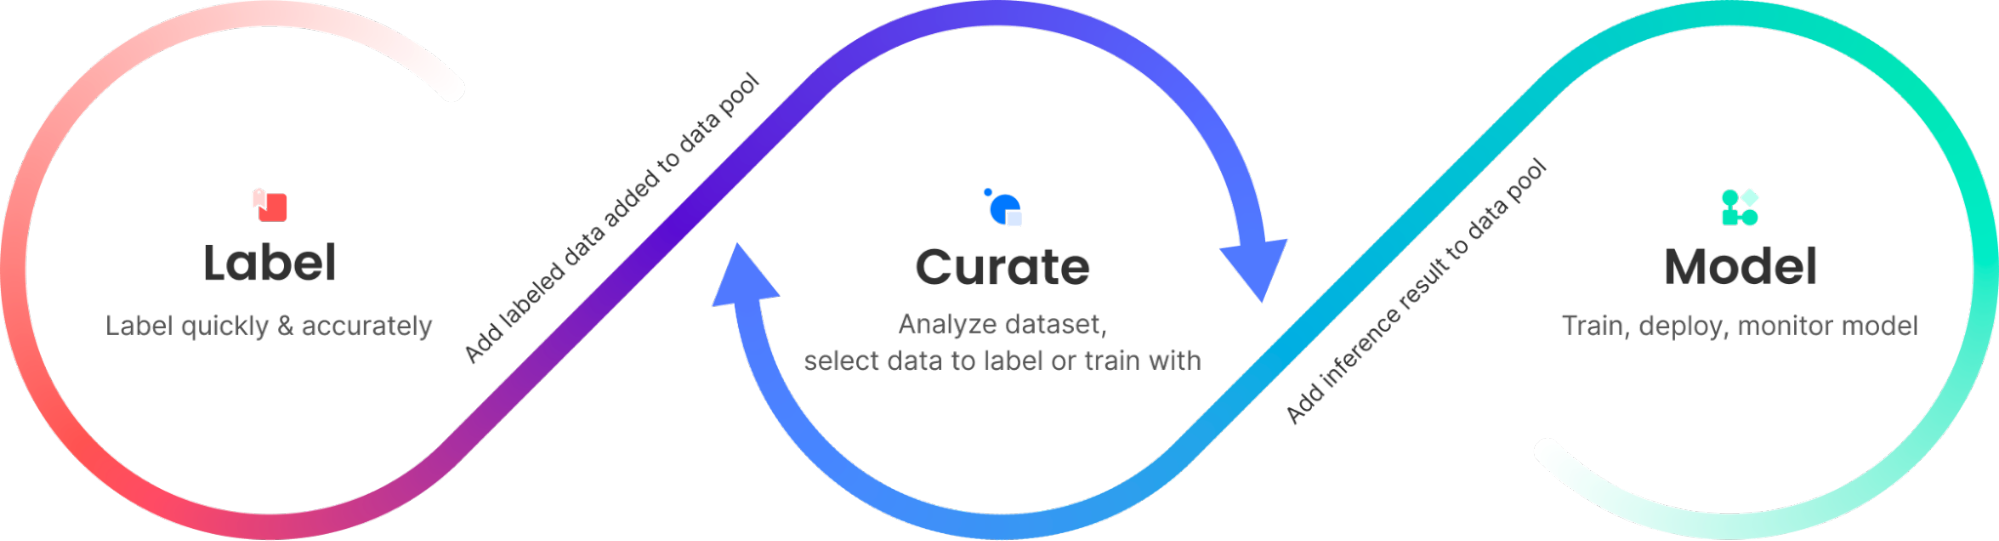 Curate helps organizations reduce the cost of their computer vision projects.